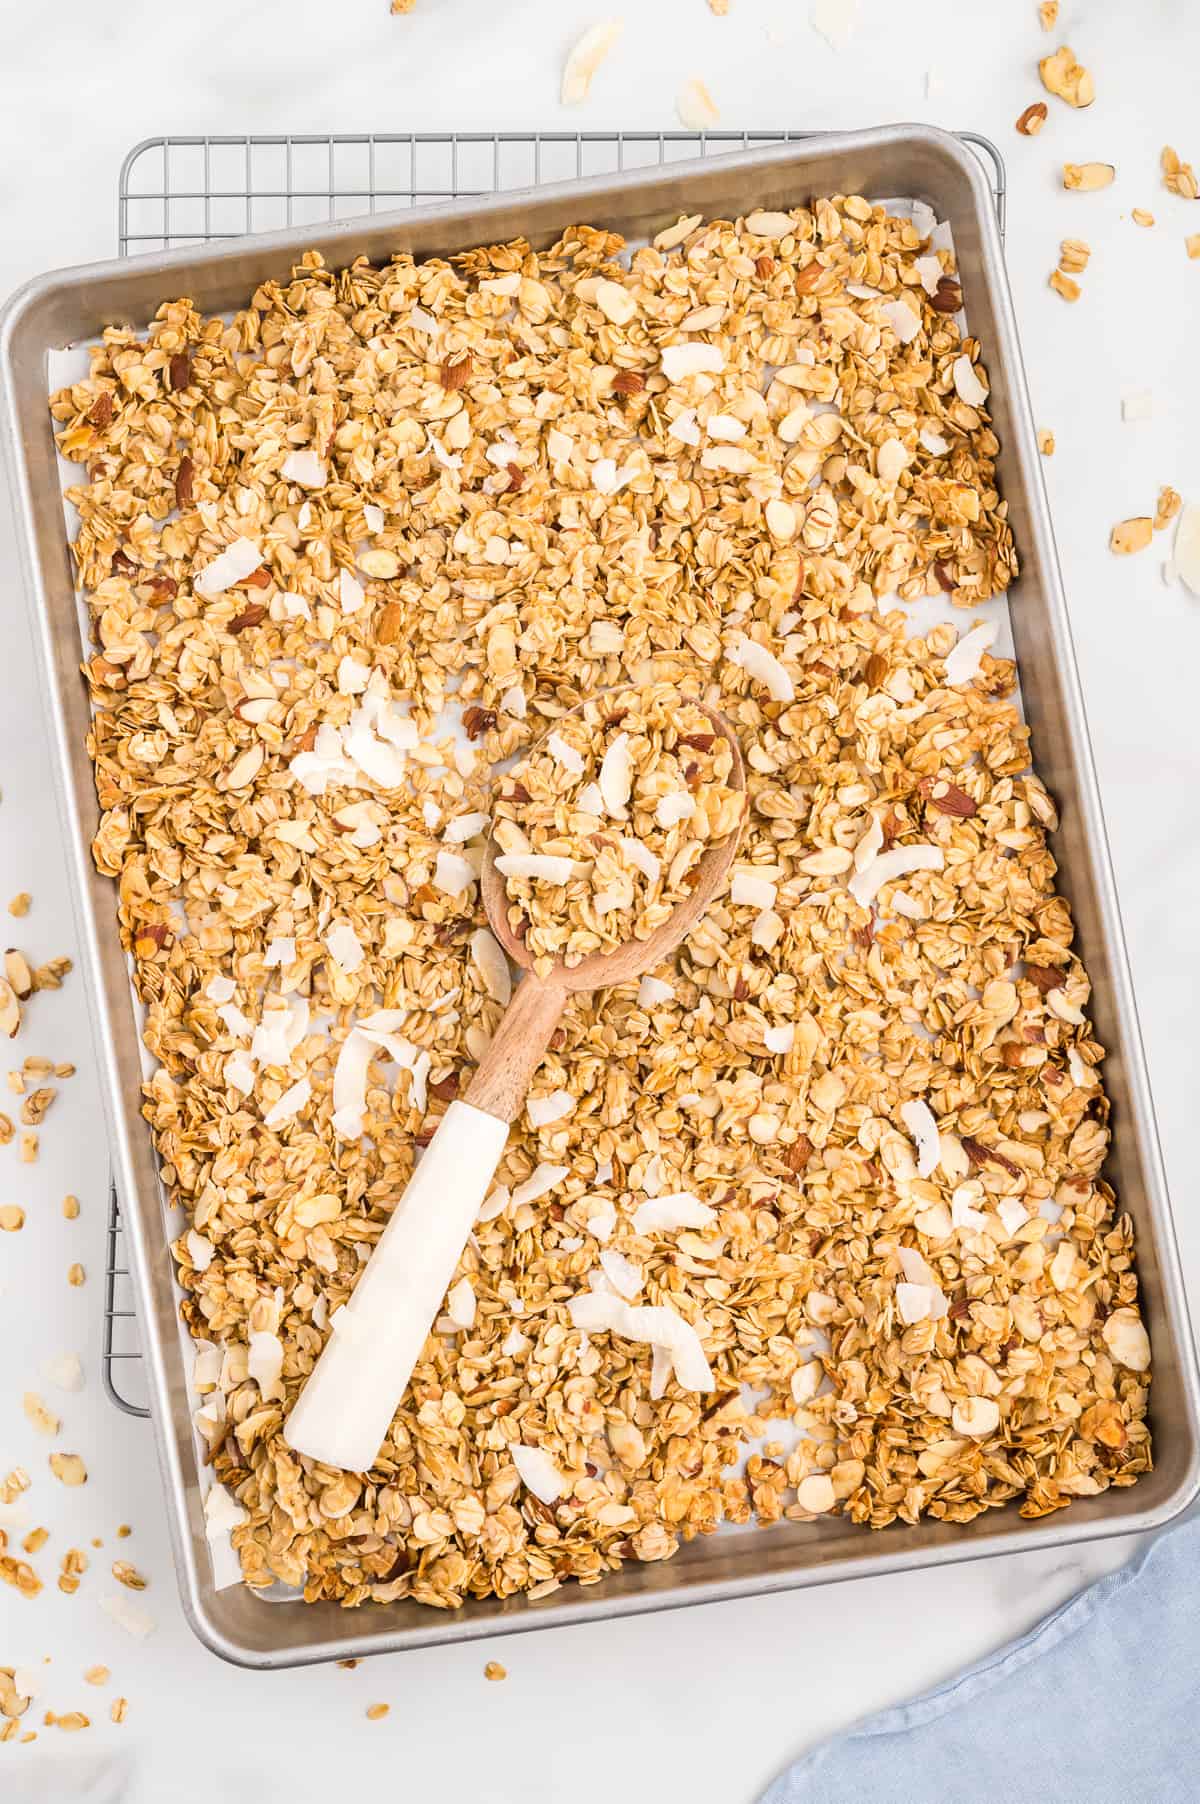 A sheet pan of vanilla almond granola garnished with coconut flakes, with some granola sprinkled around the pan on a marble background.